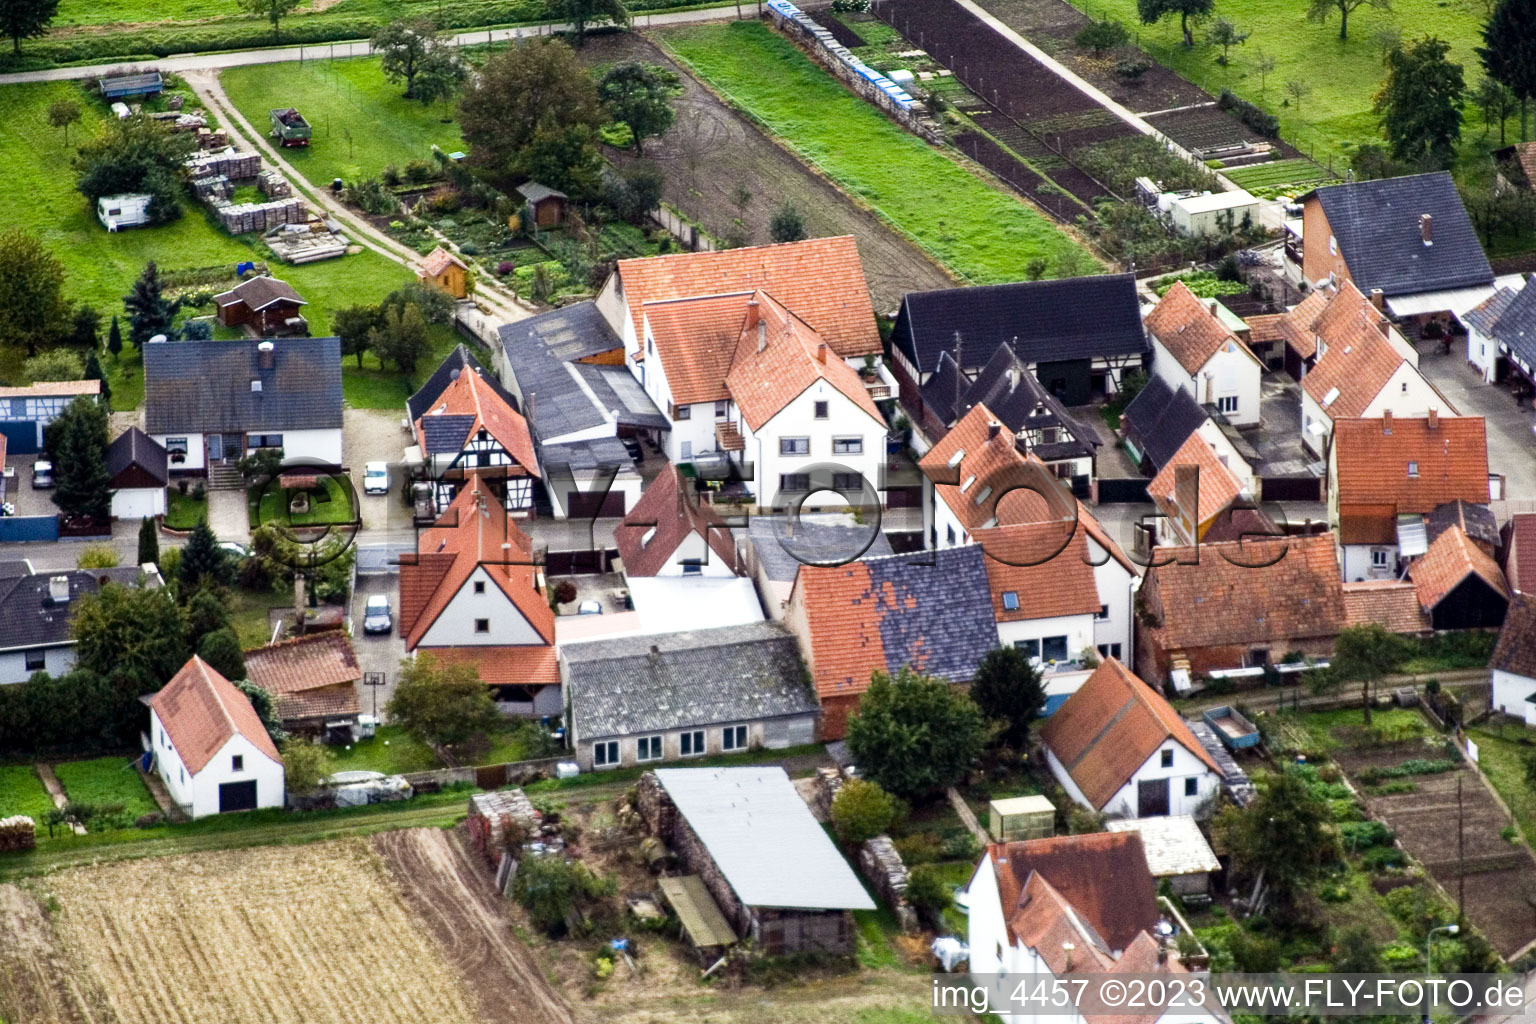 Drone image of Gänsried in Freckenfeld in the state Rhineland-Palatinate, Germany